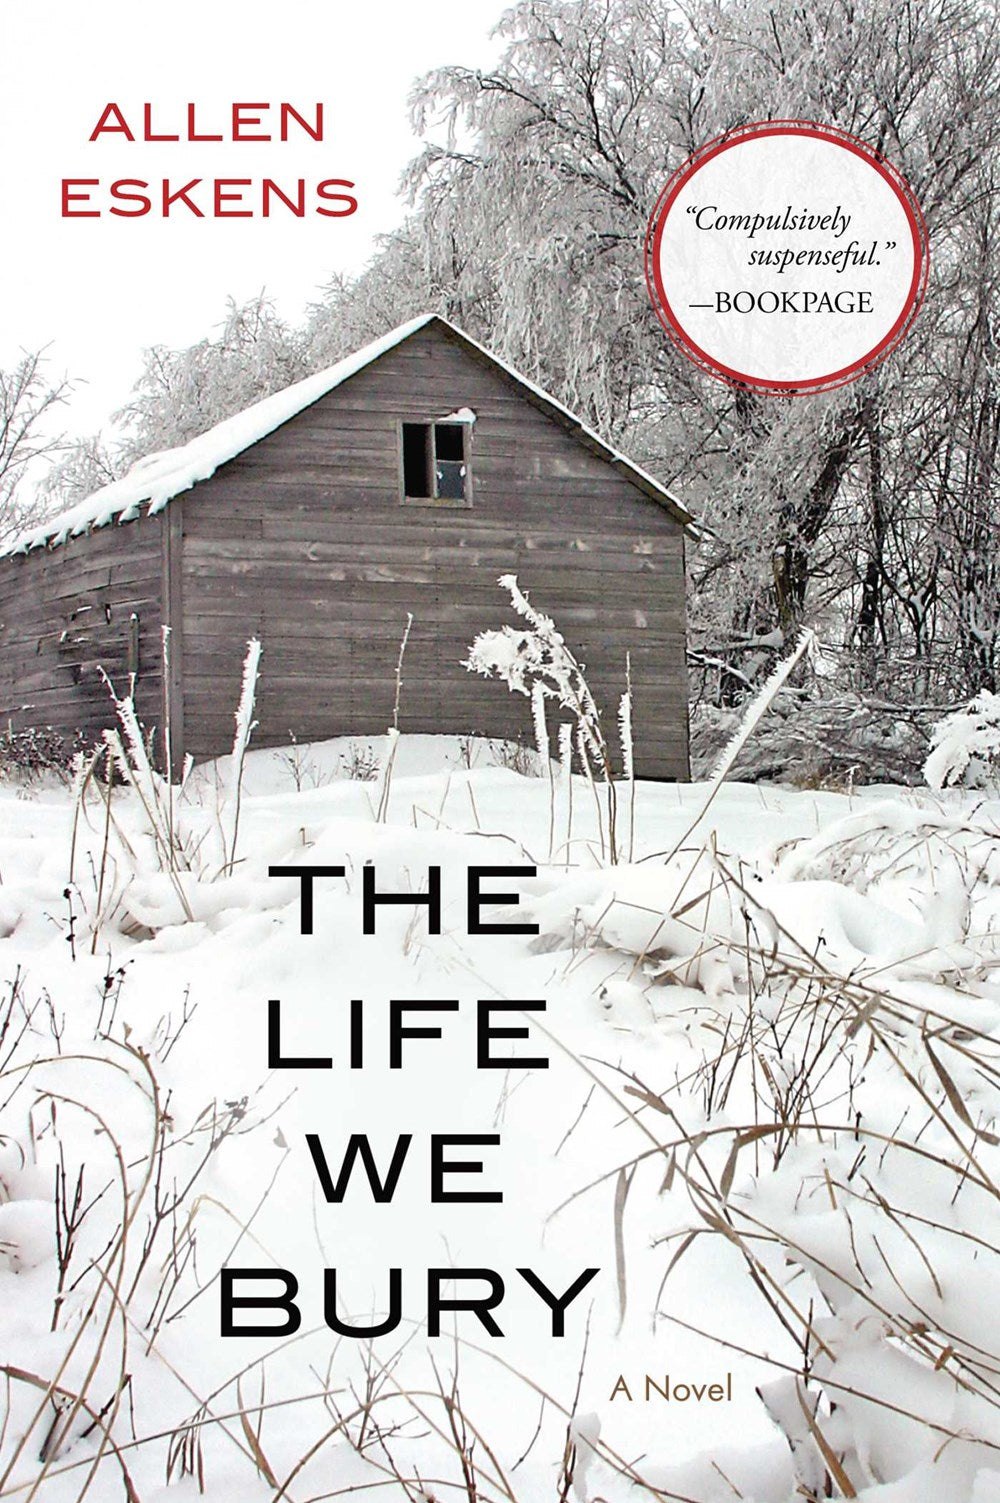 Book Review: The Life We Bury by Allen Eskens